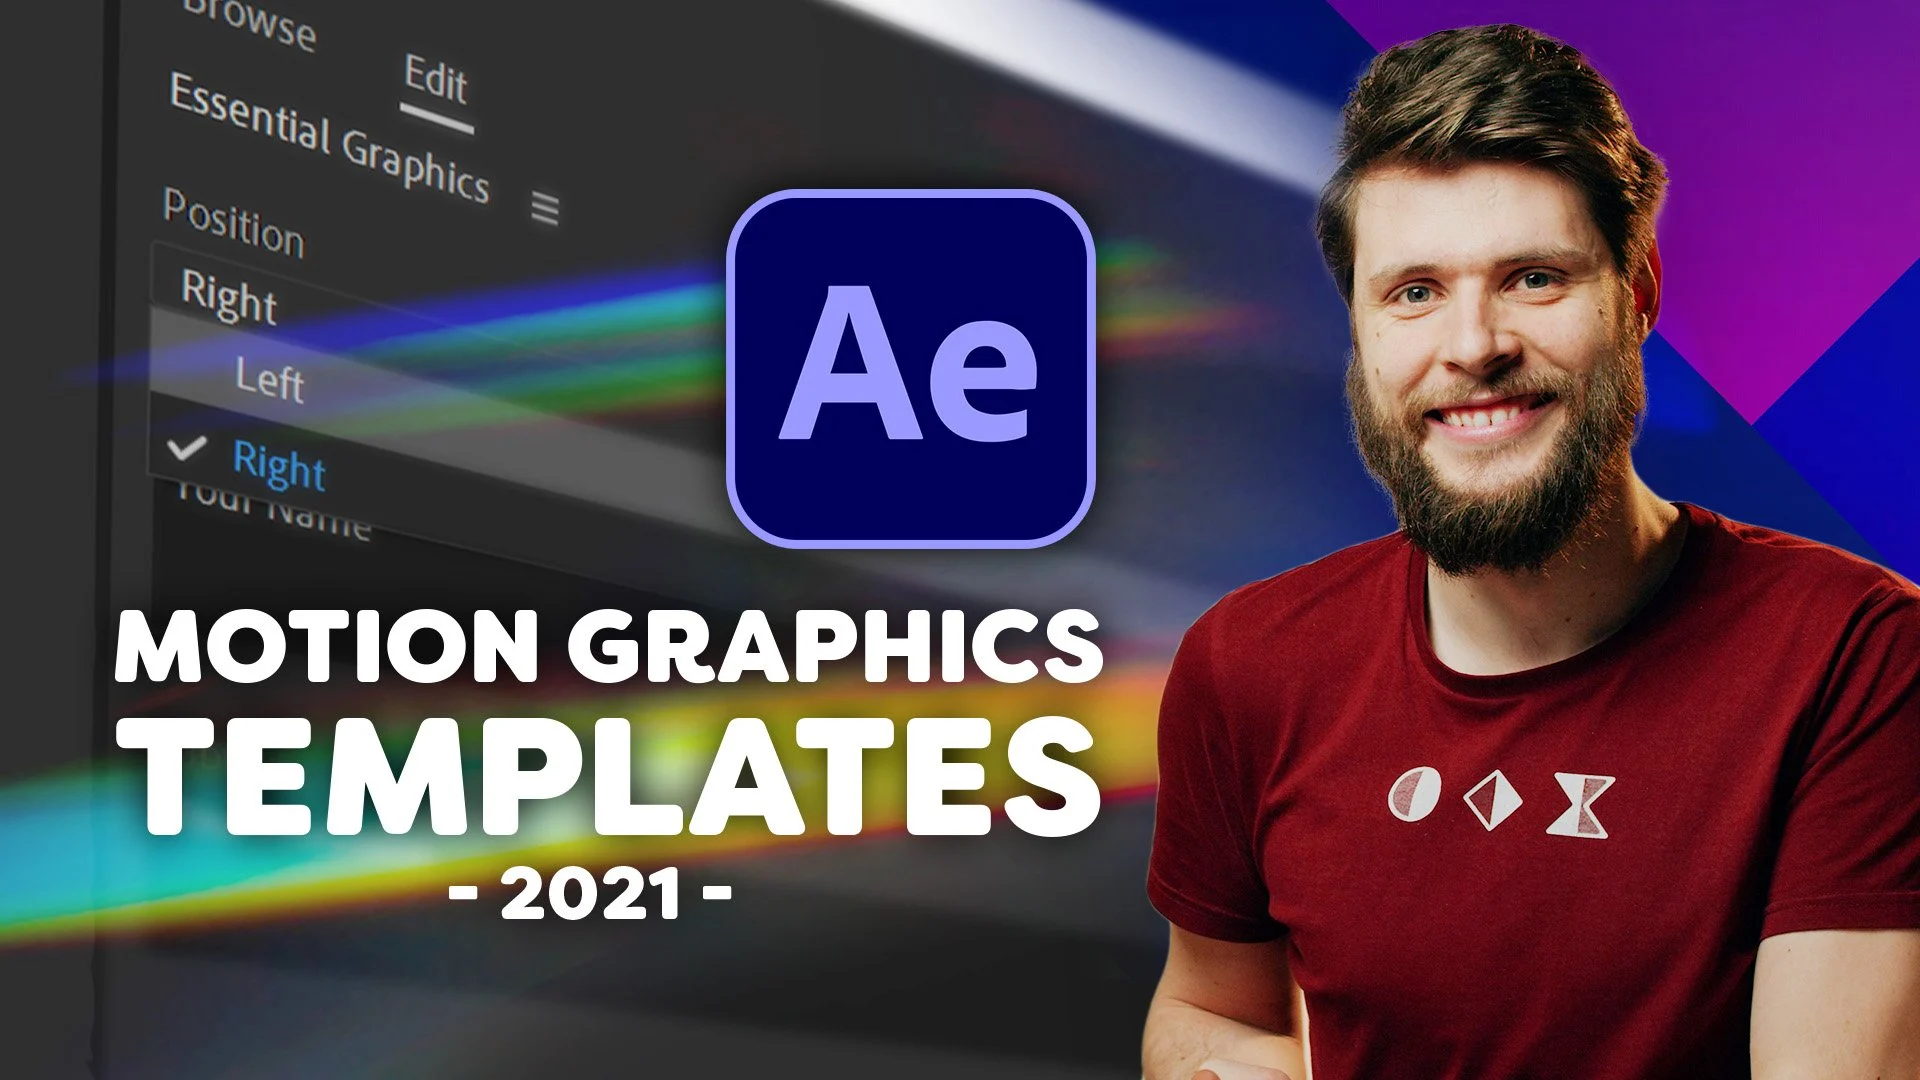 creating motion graphics with after effects pdf free download reddit